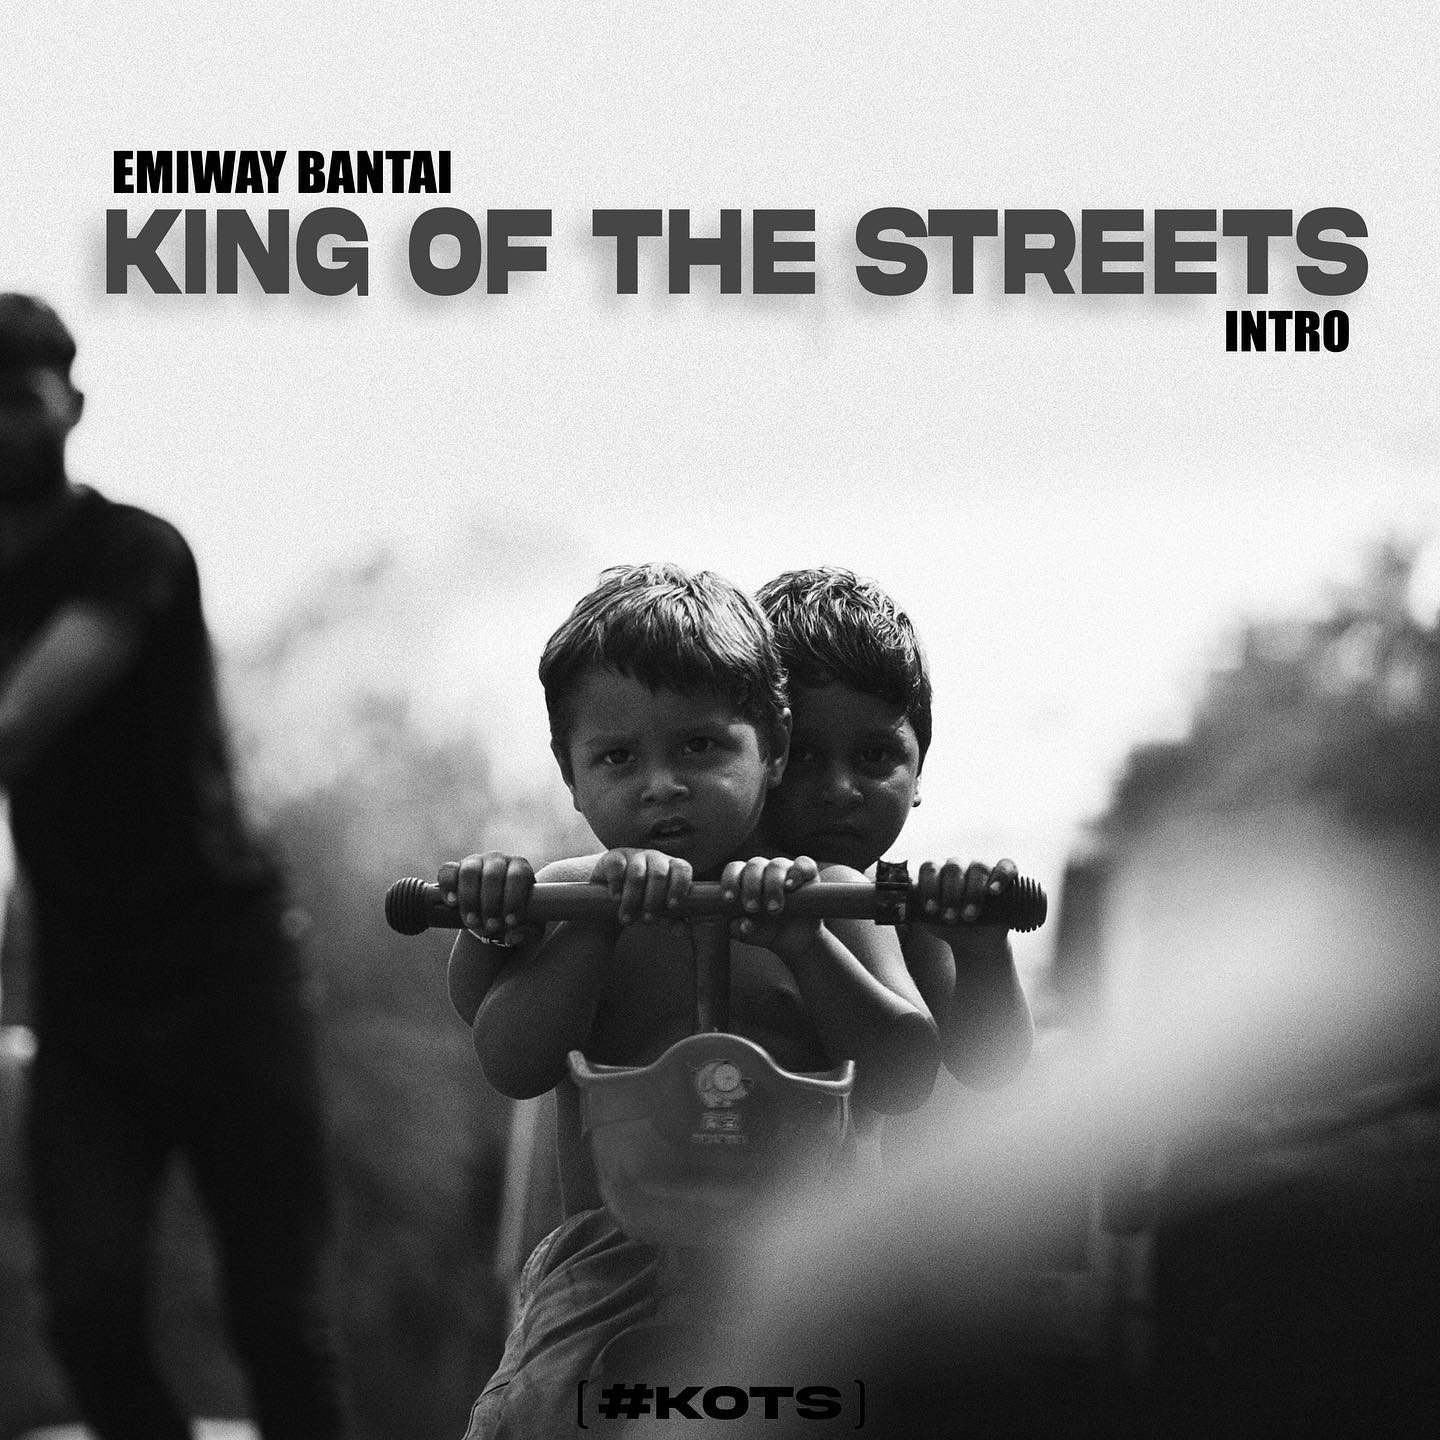 King Of The Streets Emiway Bantai song download DjJohal